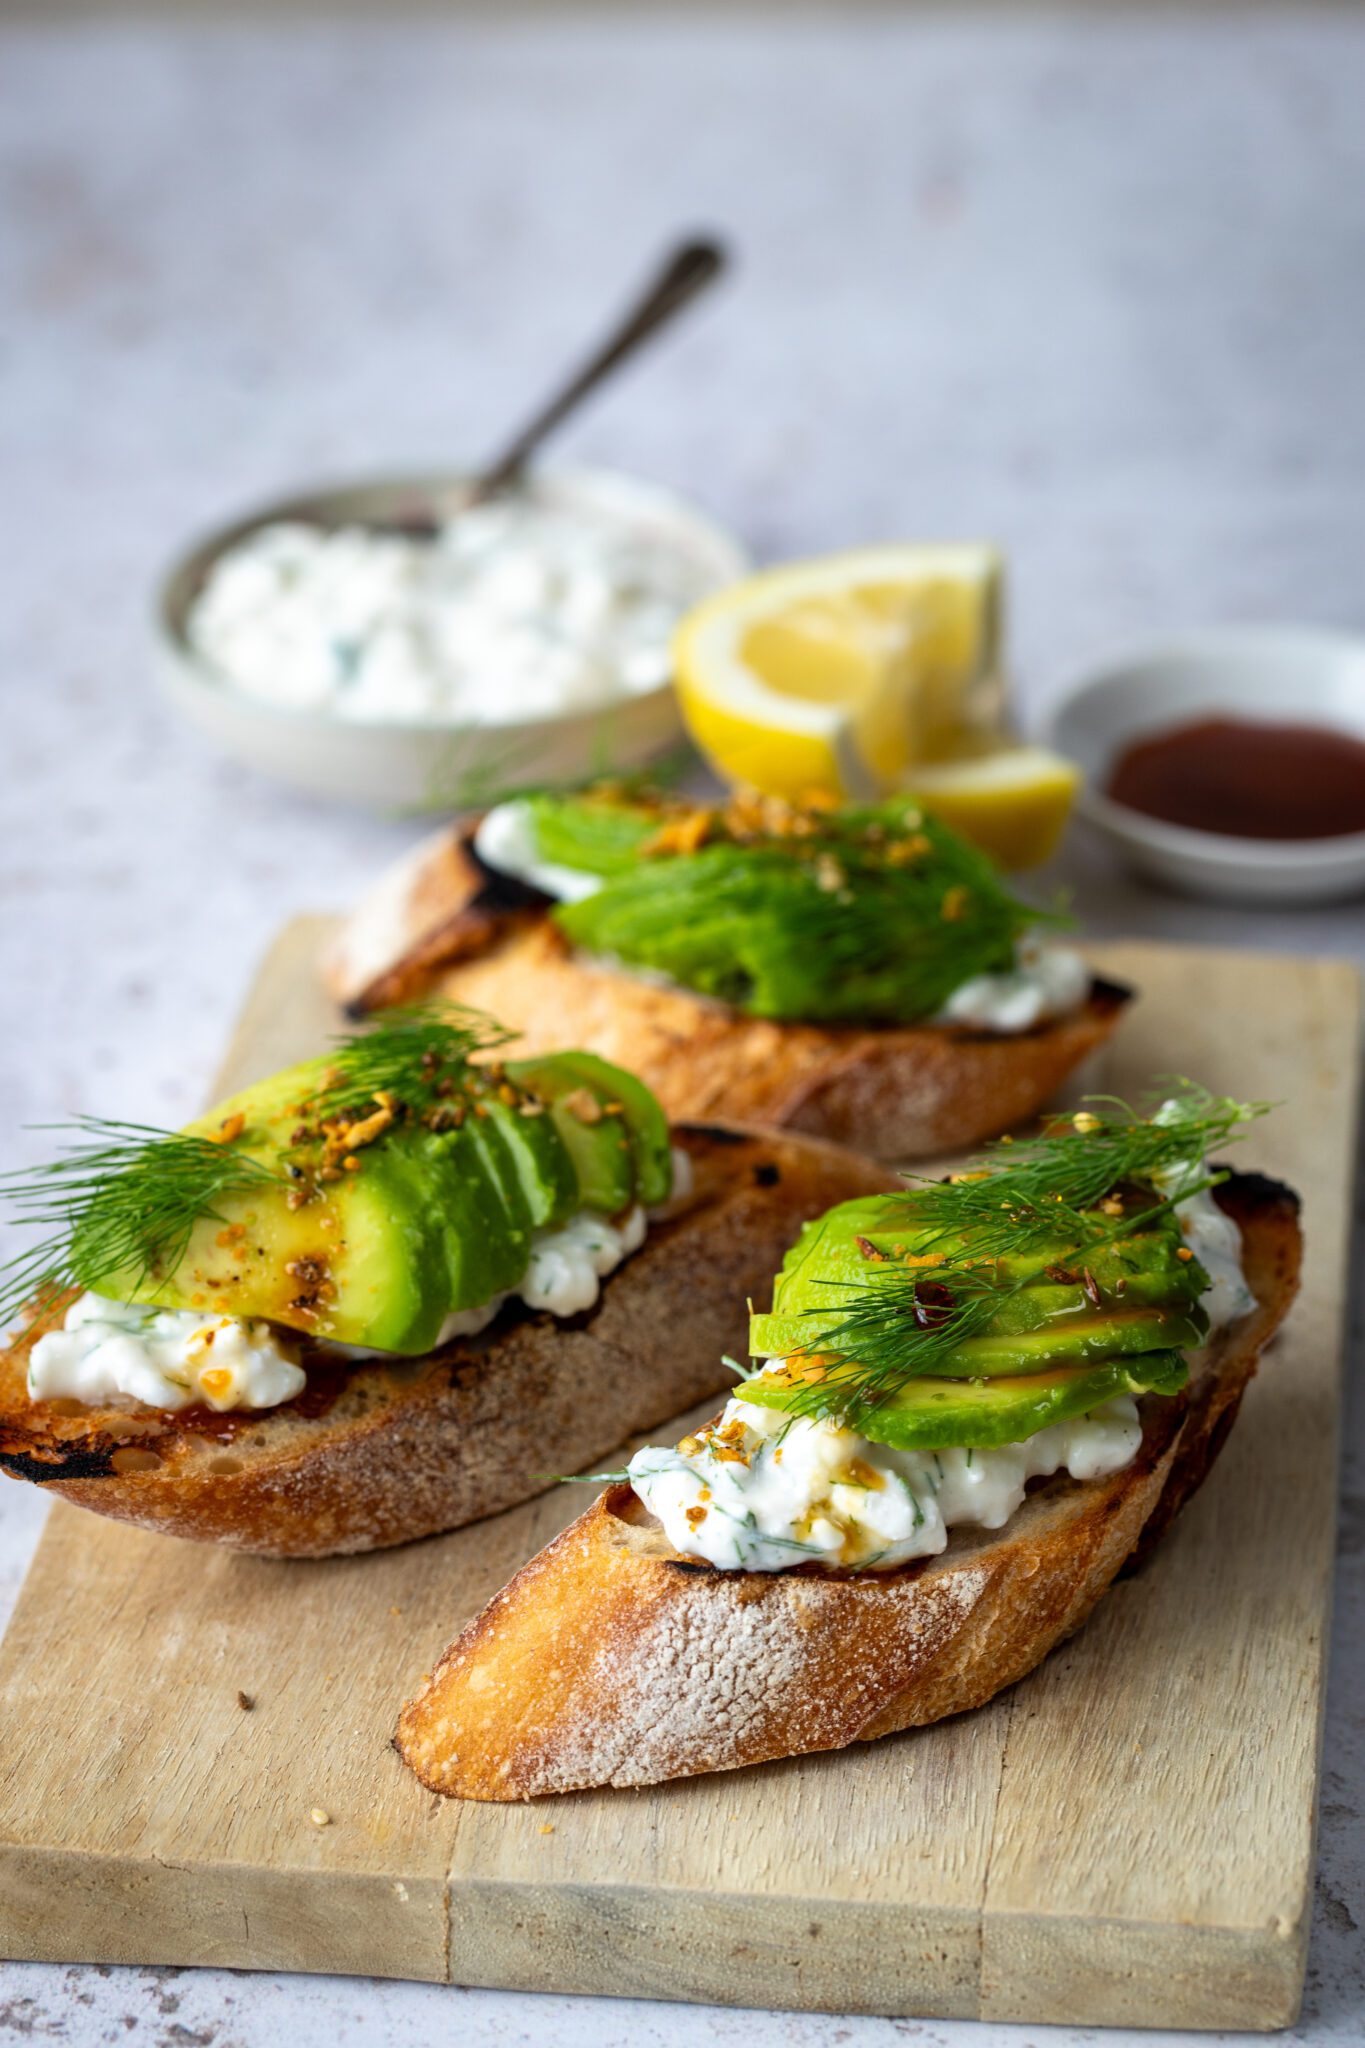 Cottage Cheese and Avocado Breakfast Bruschetta with Dukkah and Manuka Honey Drizzle